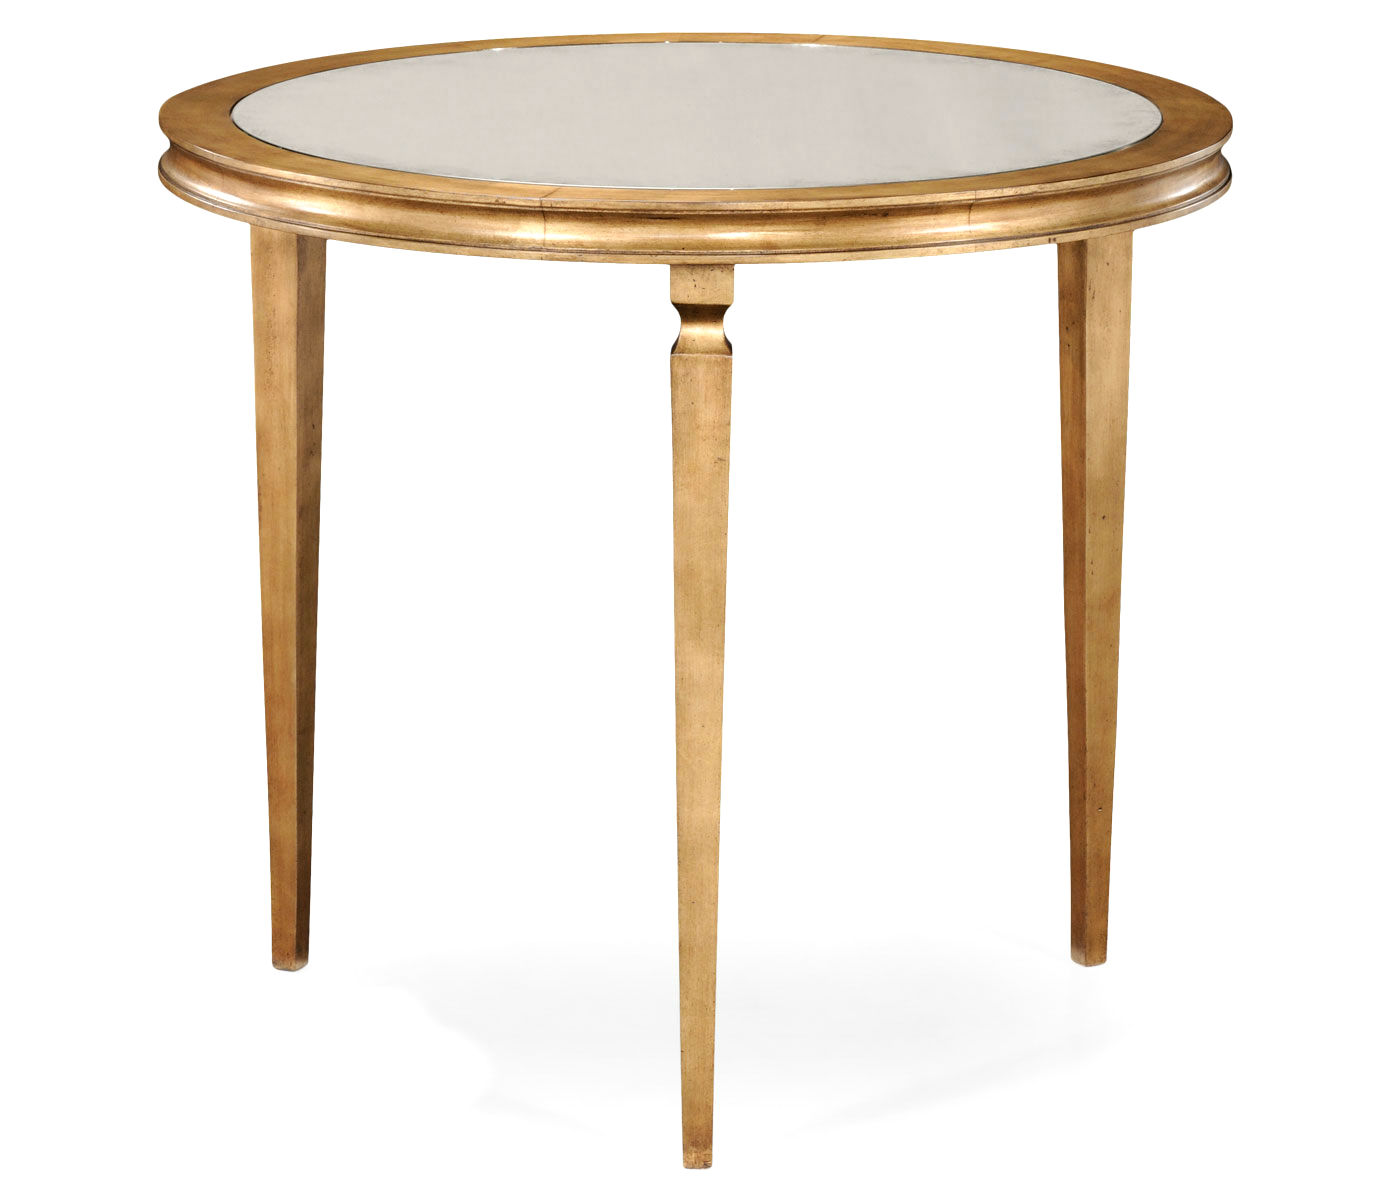 italian tables style gold side tall accent table classic antique mirrored antiqued gilded partner end console coffee available hospitality small cabinet with drawers narrow